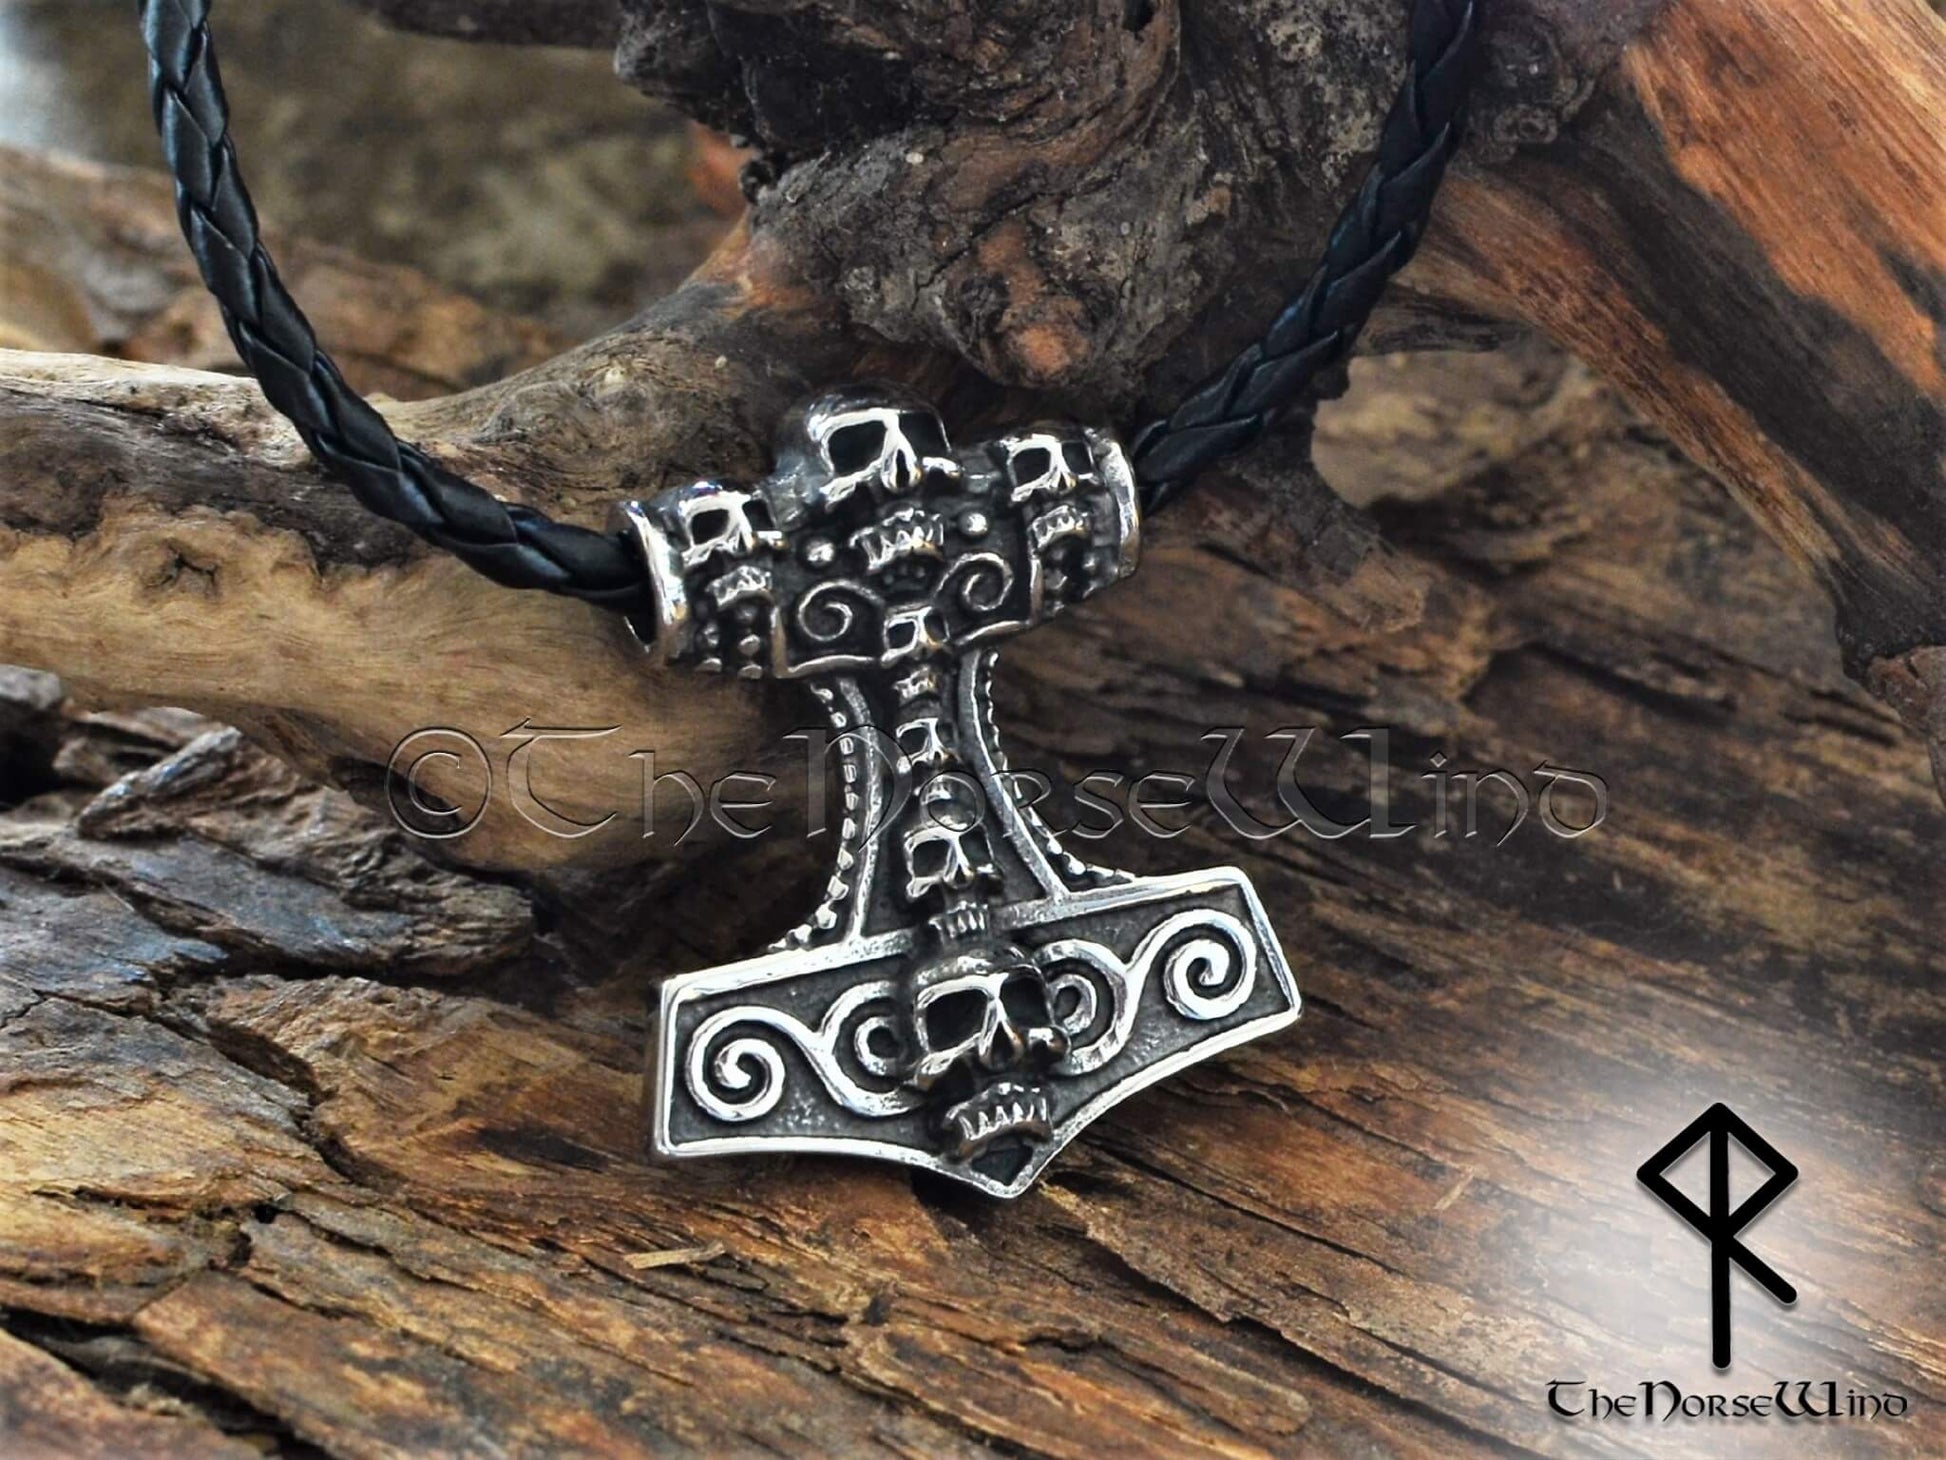 Thor's Hammer Viking Necklace, Norse Mjolnir Pendant - TheNorseWind